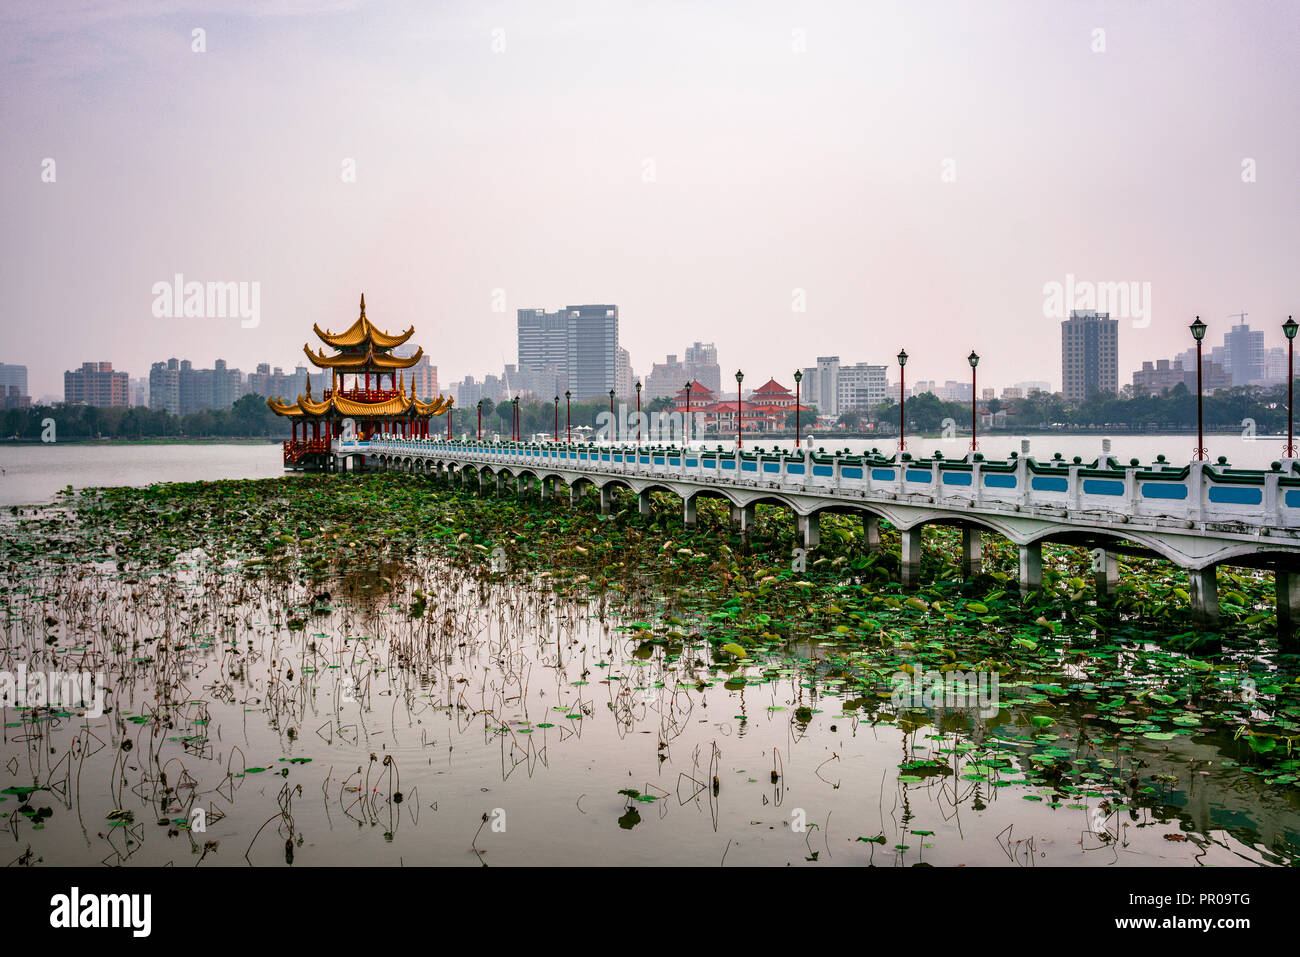 Side view of Spring and autumn pavilions at lotus pond lake in Kaohsiung Taiwan Stock Photo